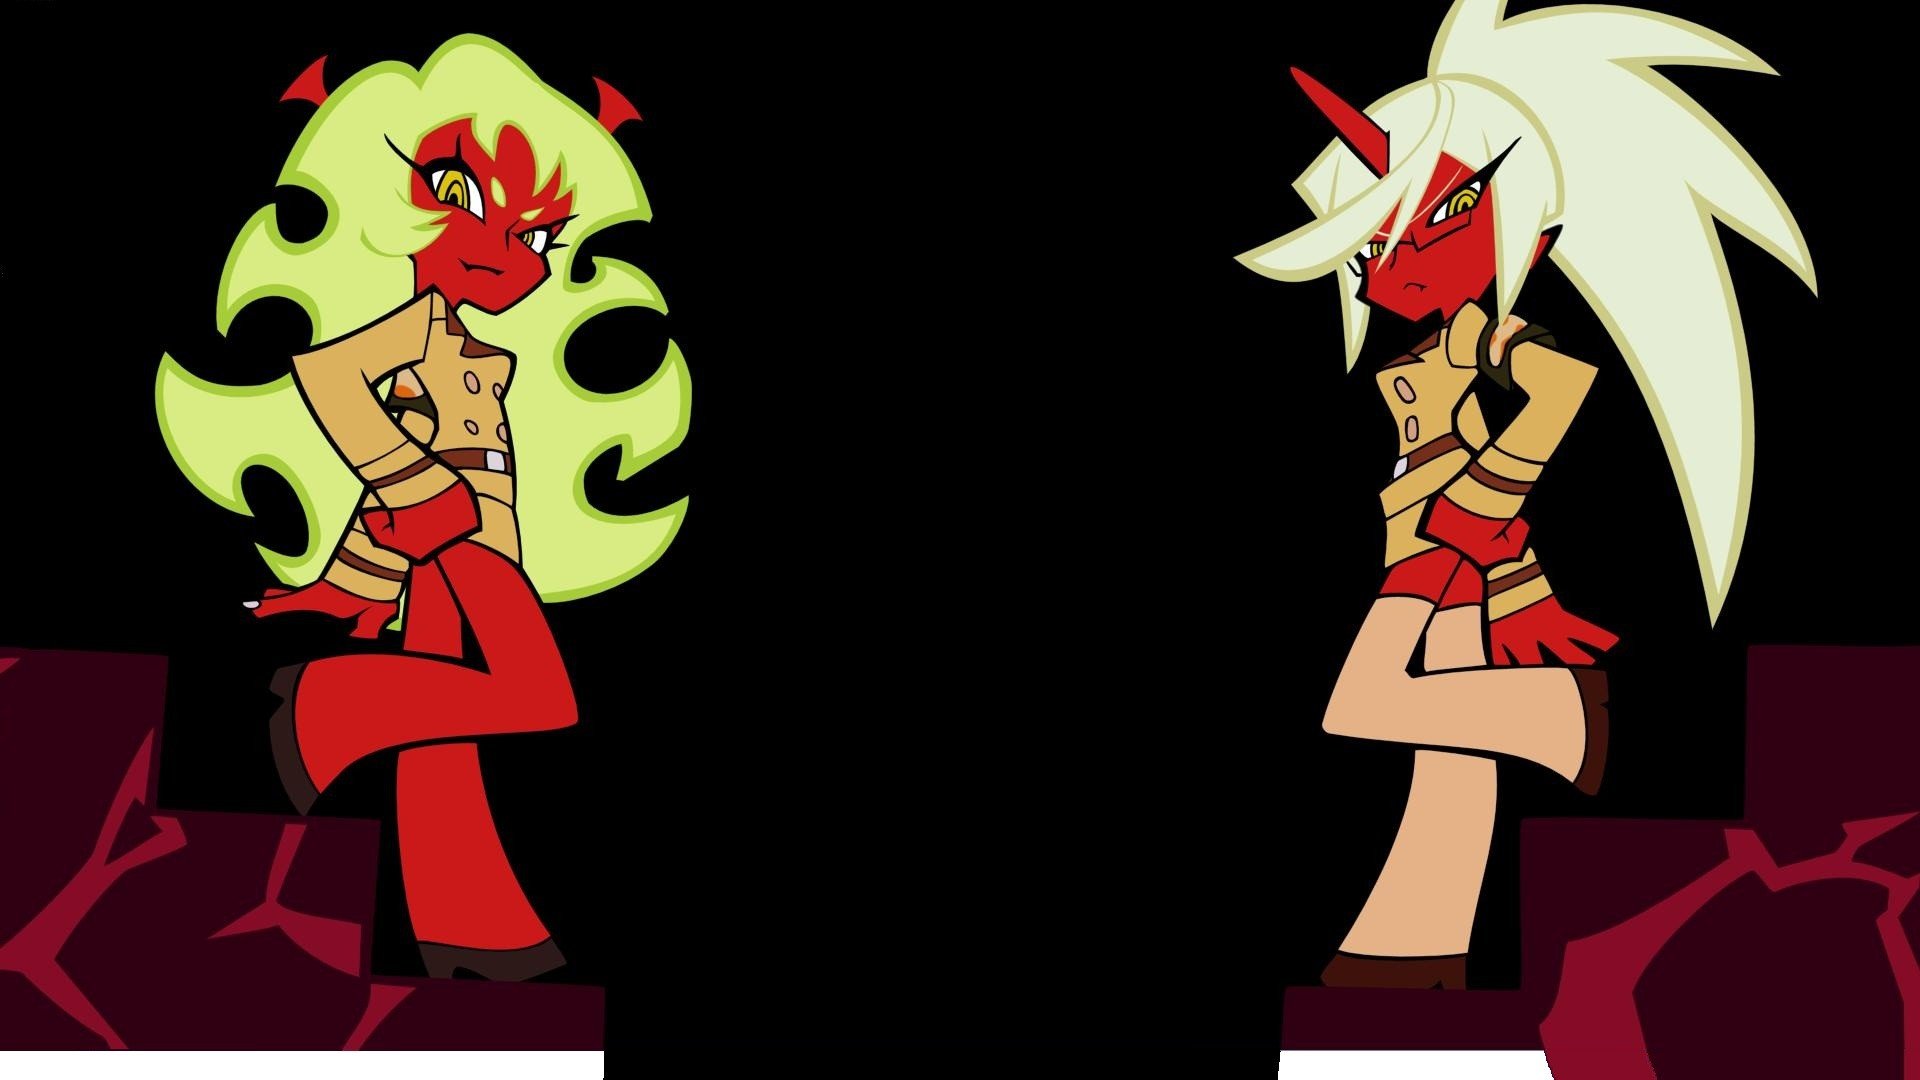 Panty and Stocking with Garterbelt, Kneesocks (character), Scanty Wallpaper